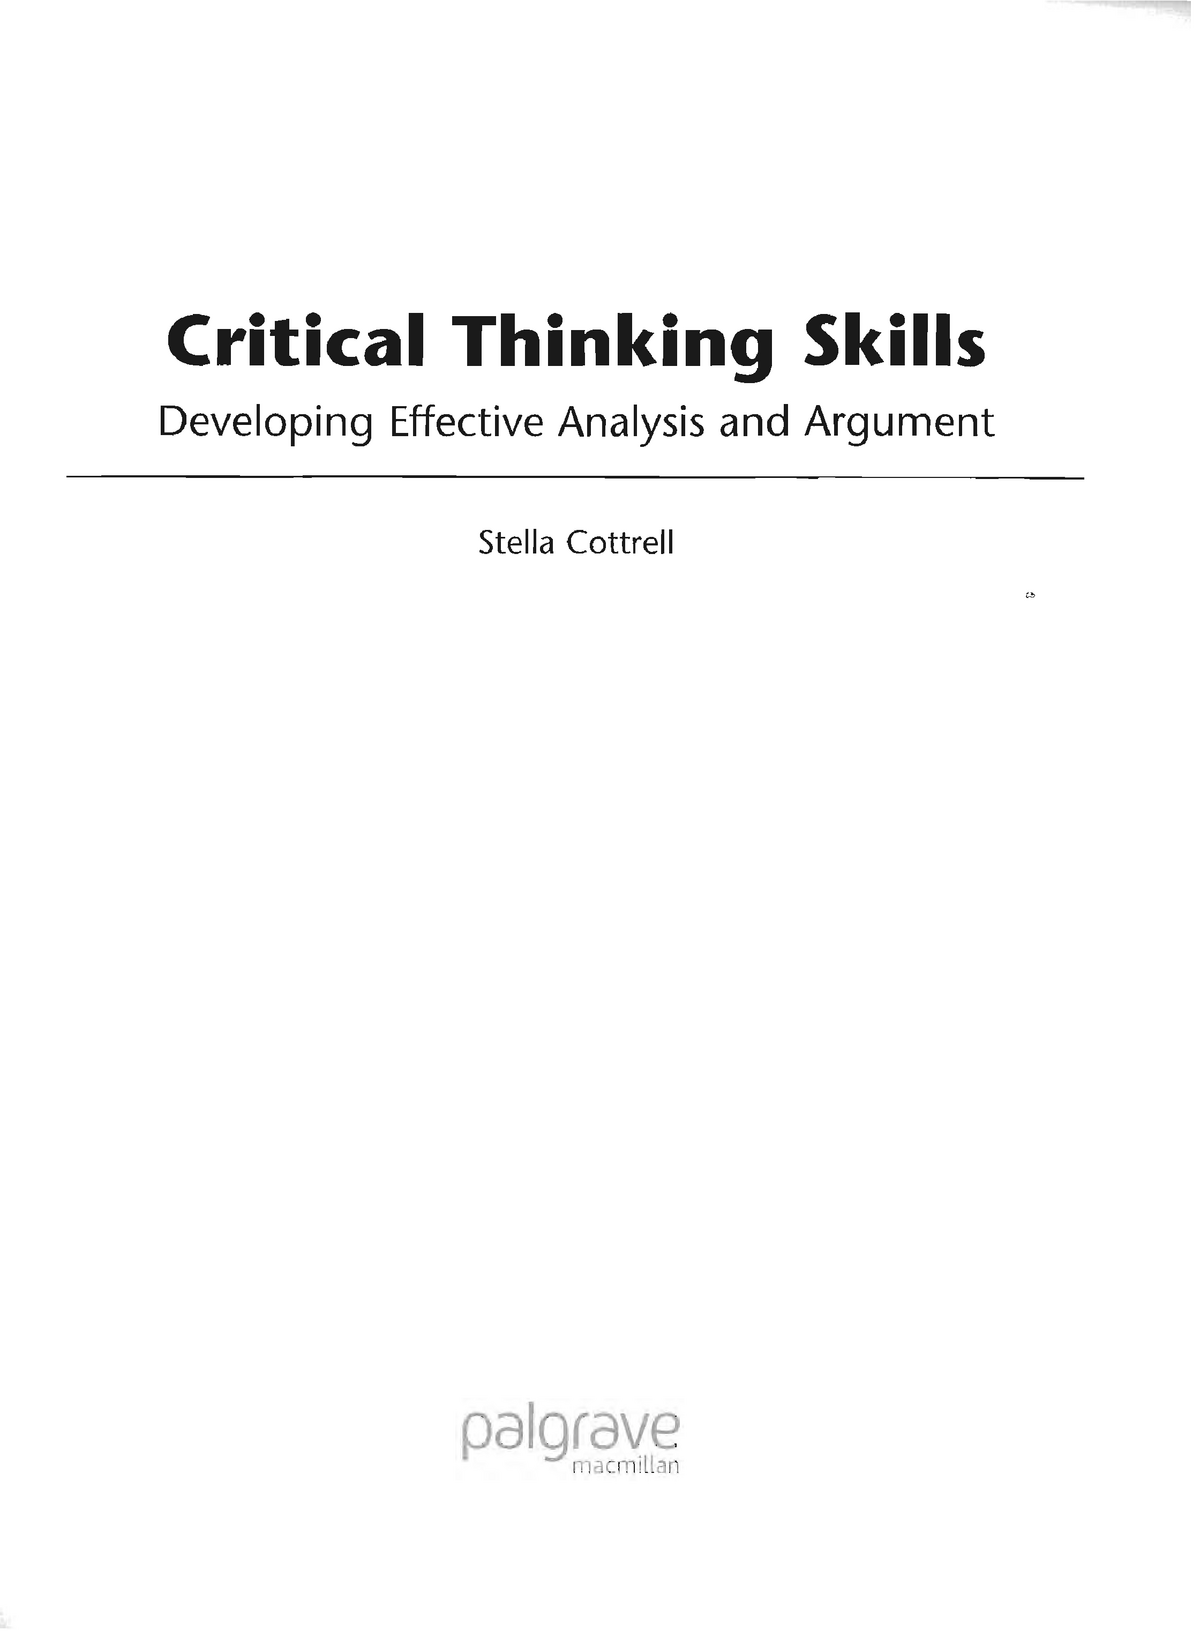 critical thinking skills developing effective analysis and argument stella cottrell